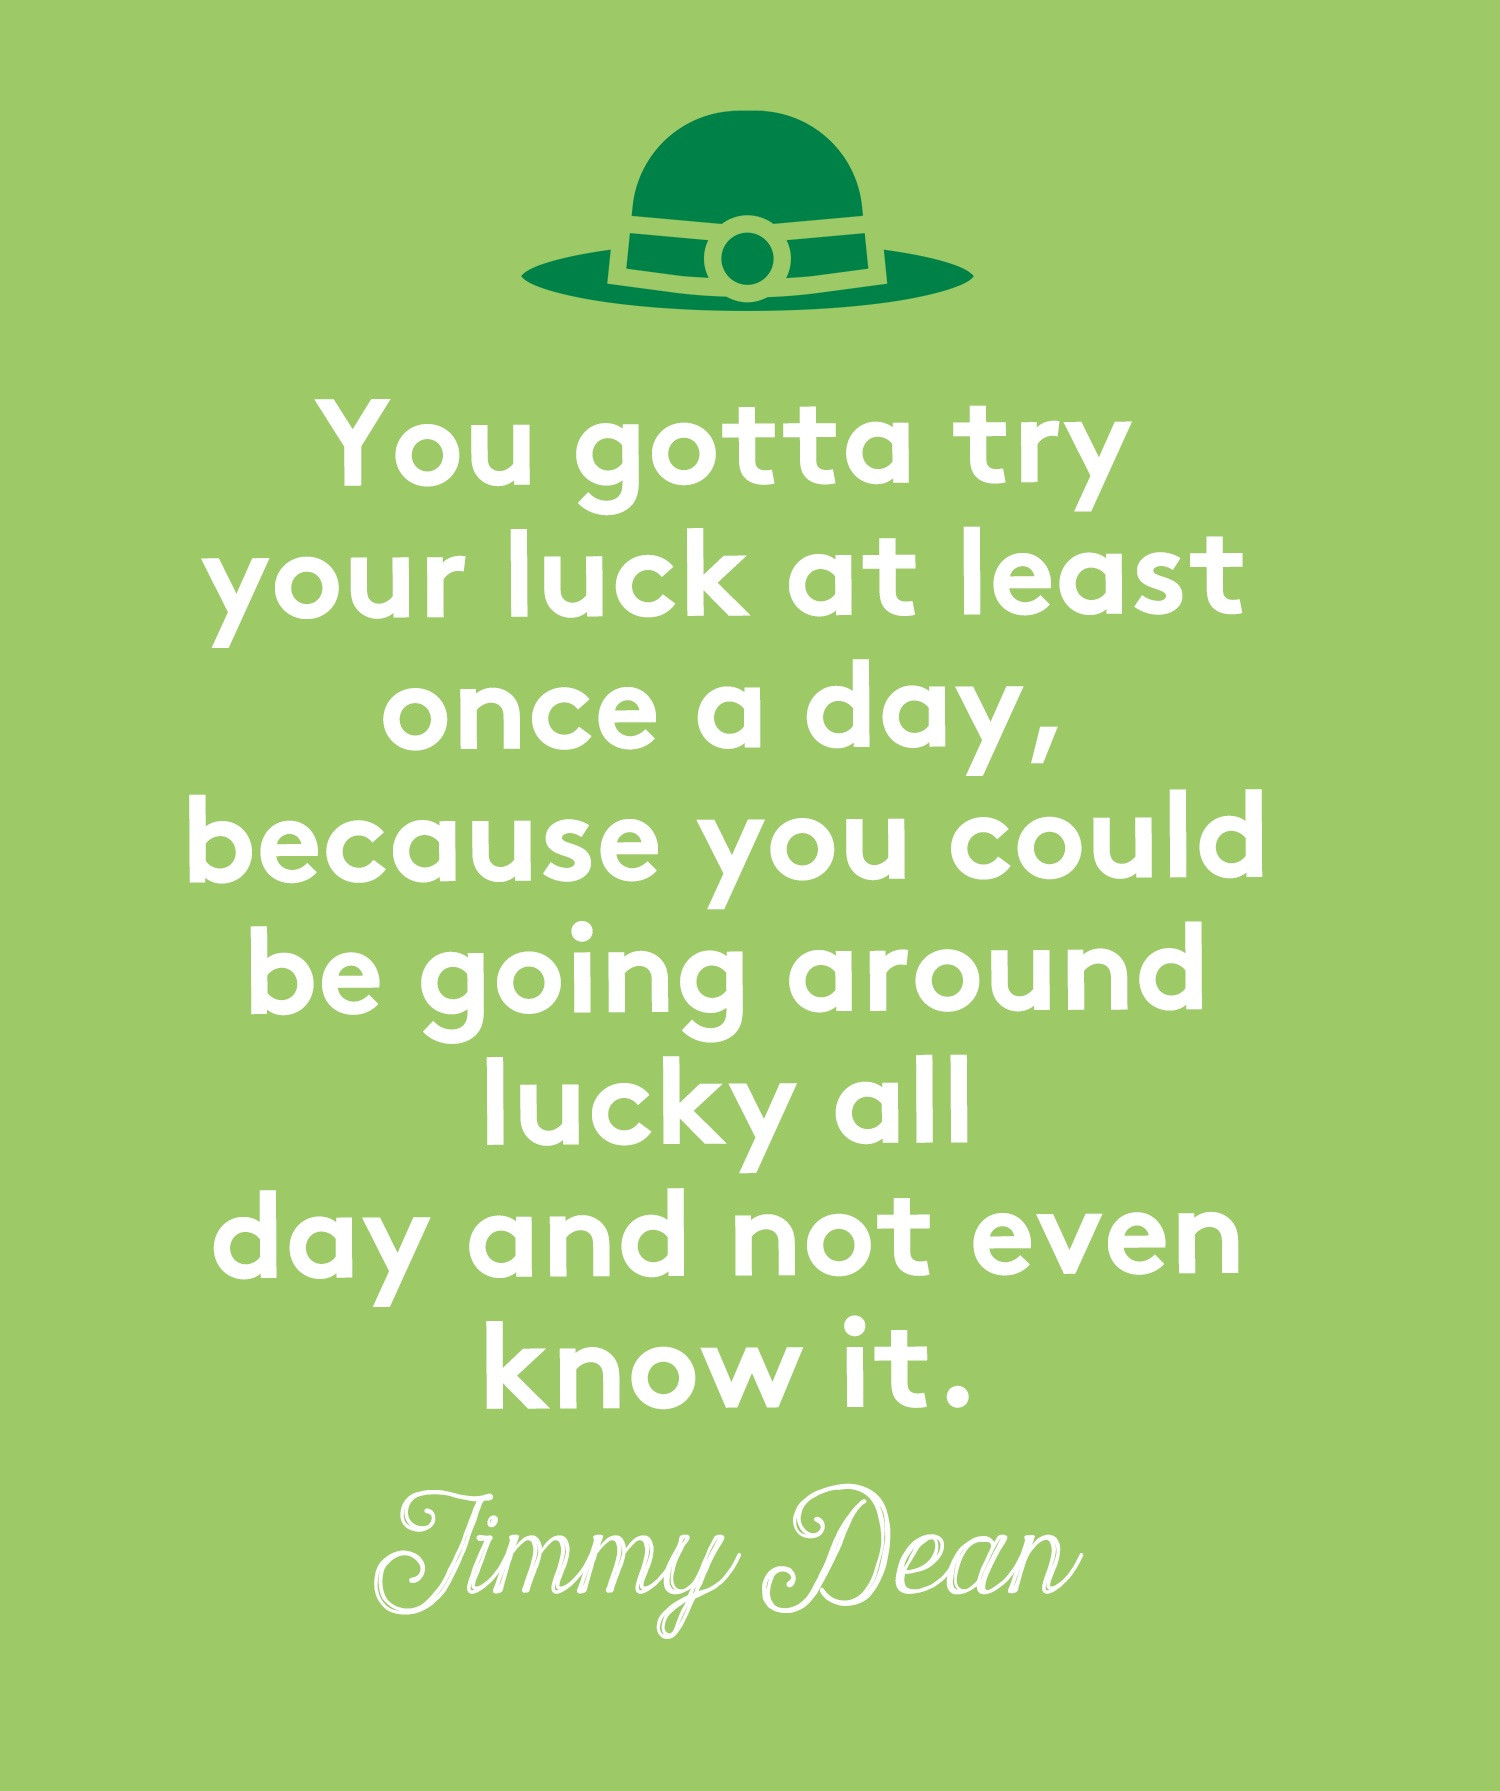 Saint Patrick Day Quotes
 9 St Patrick’s Day Memes and Quotes You’ll Send to